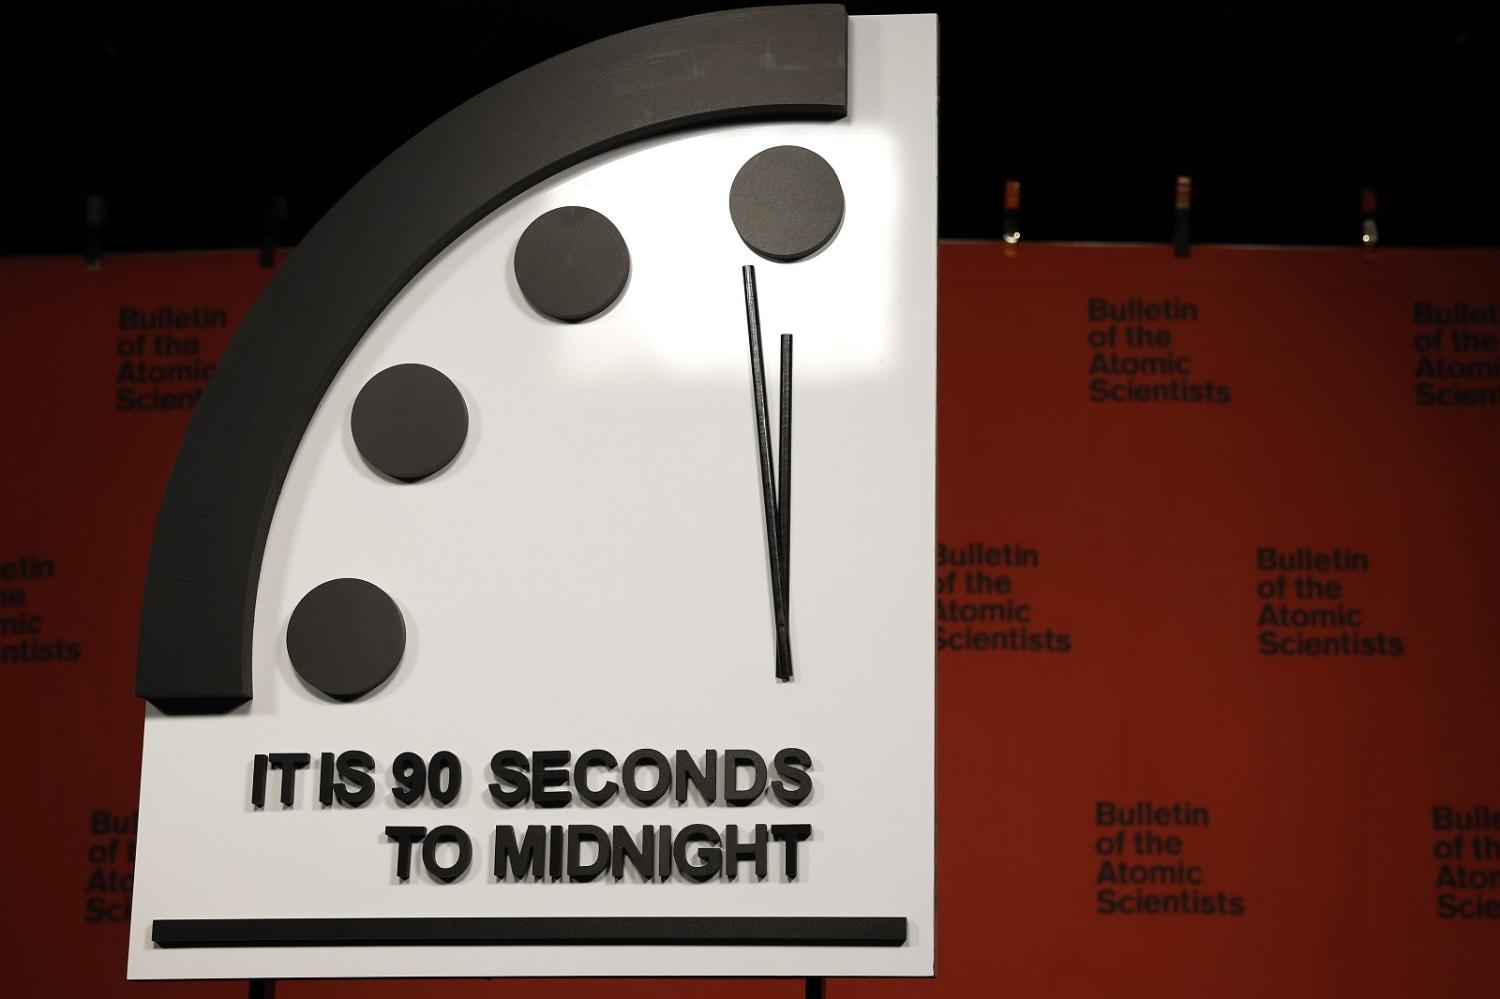 The 2023 Doomsday Clock is displayed before a live-streamed event with members of the Bulletin of the Atomic Scientists on 24 January 2023, Washington, DC (Anna Moneymaker/Getty Images)